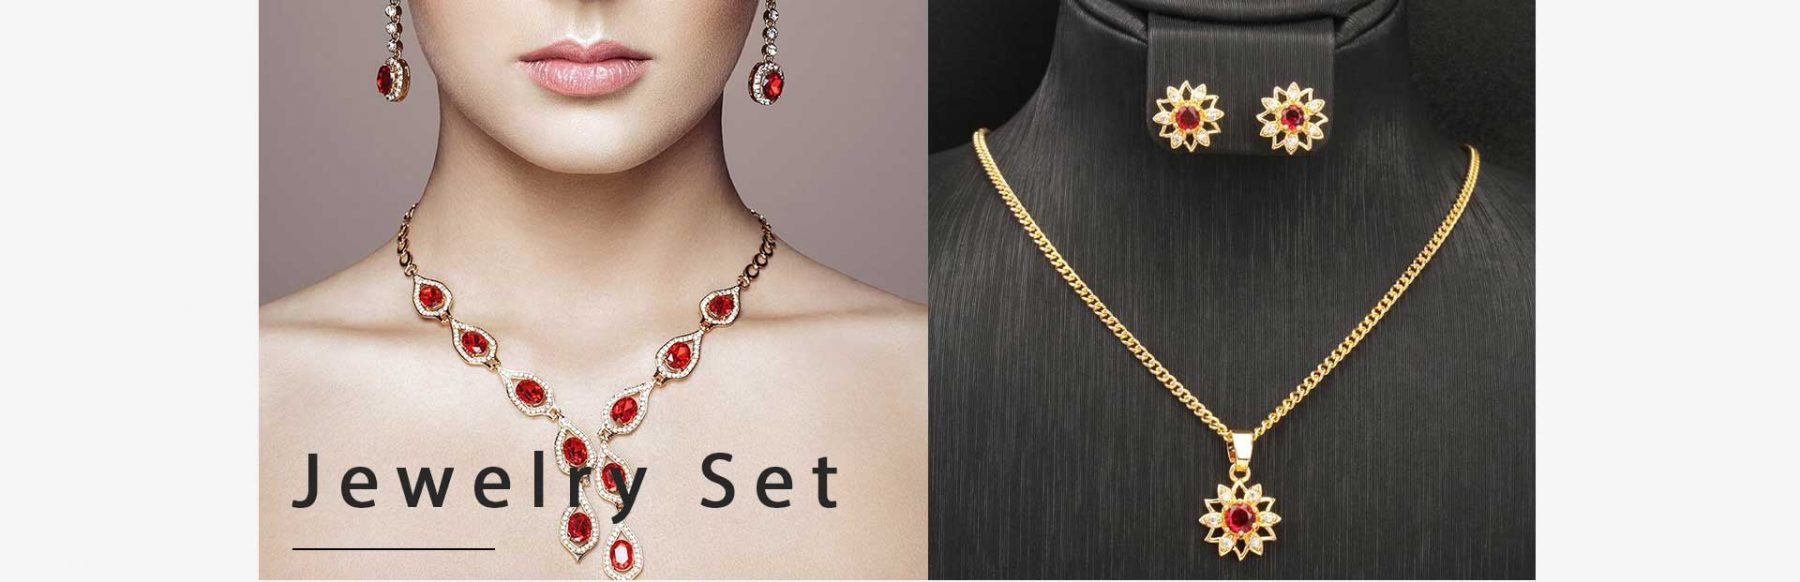 7 Important Aspects to Look For In Wholesale Gemstone Jewelry Suppliers